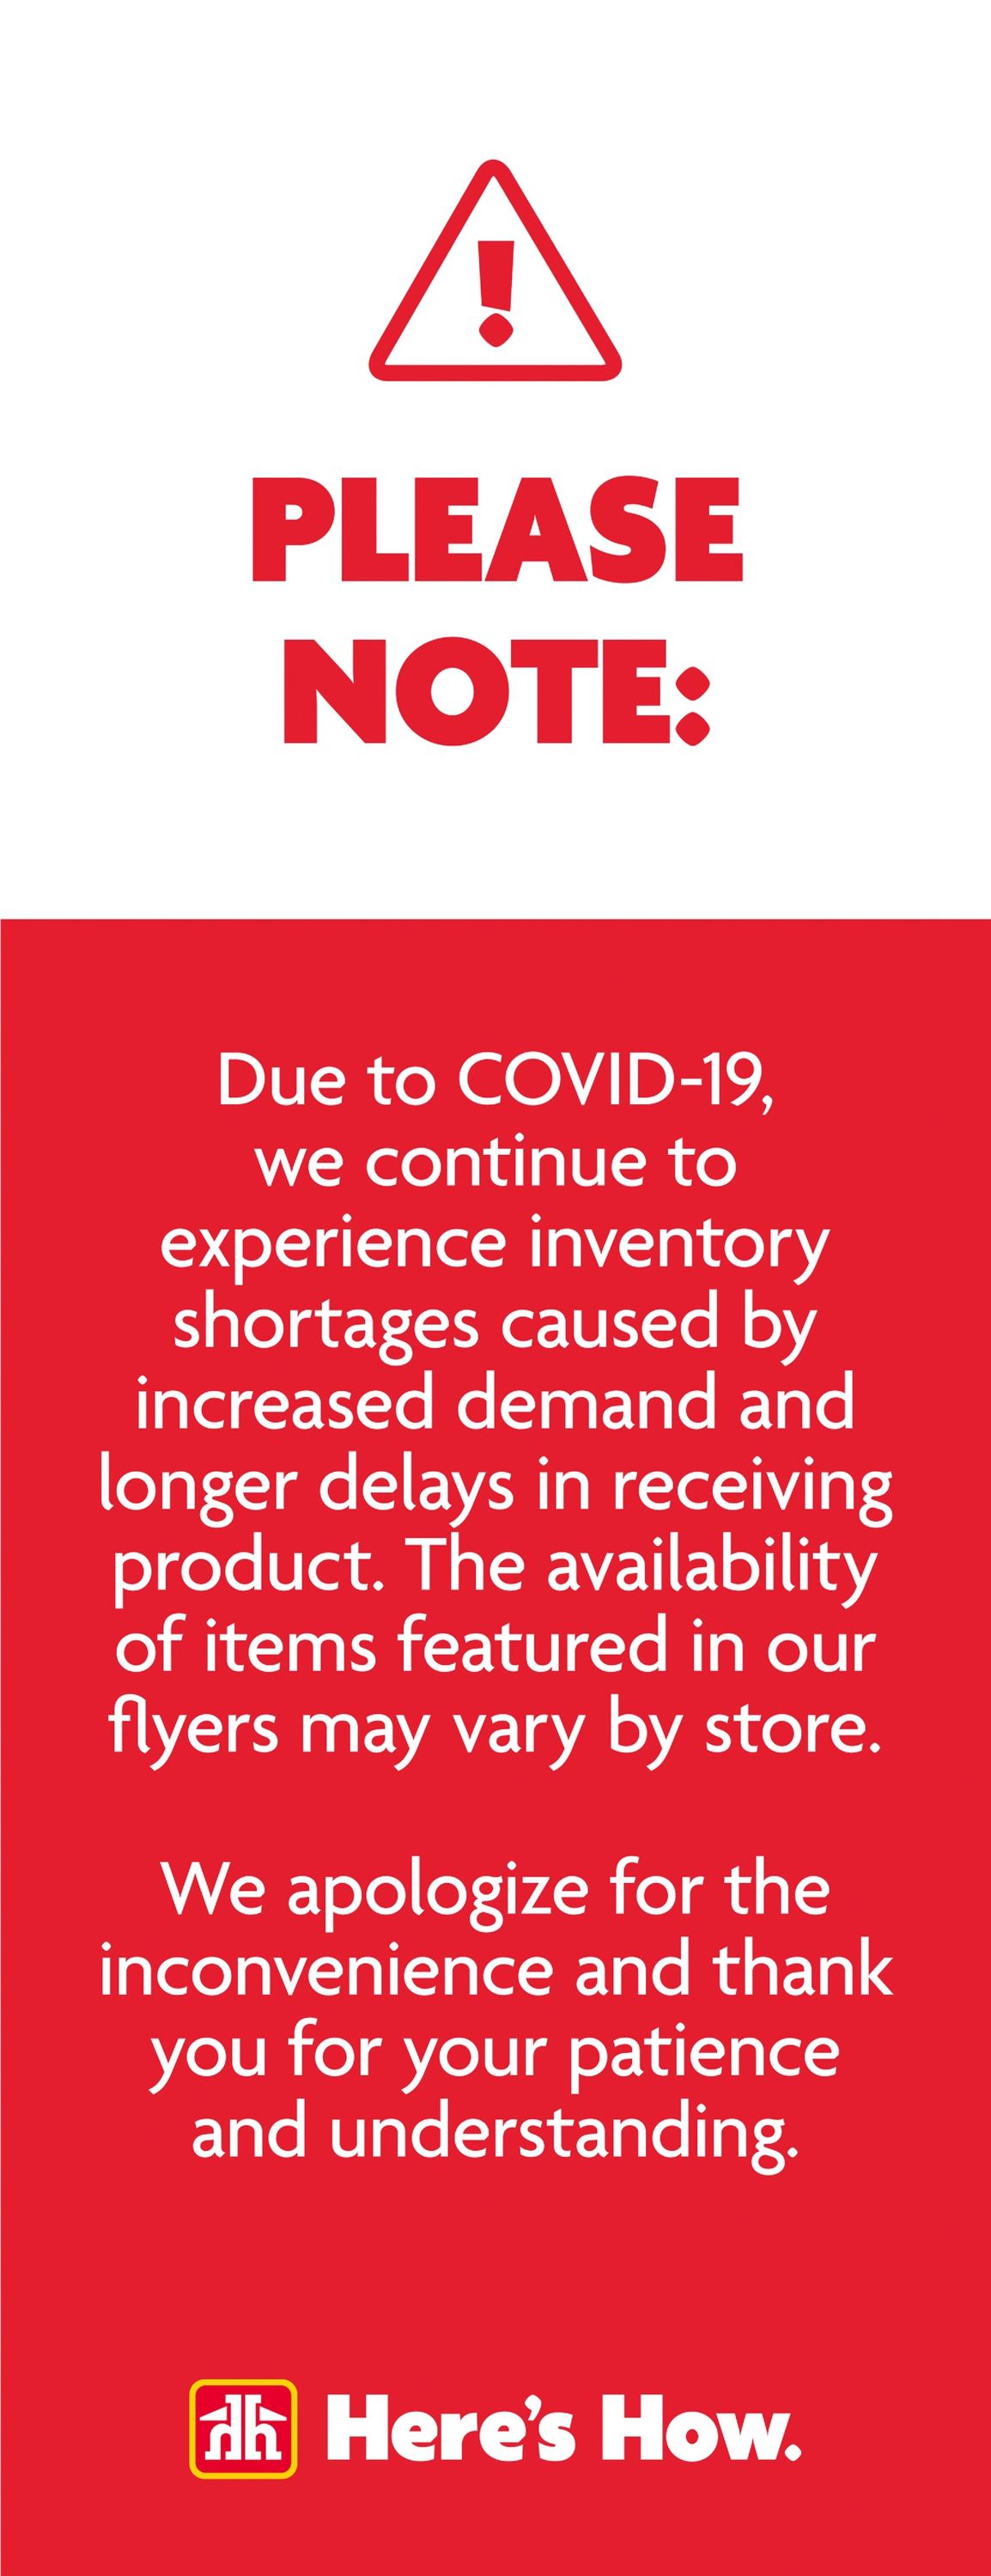 Home Hardware Flyer from 10/28/2021